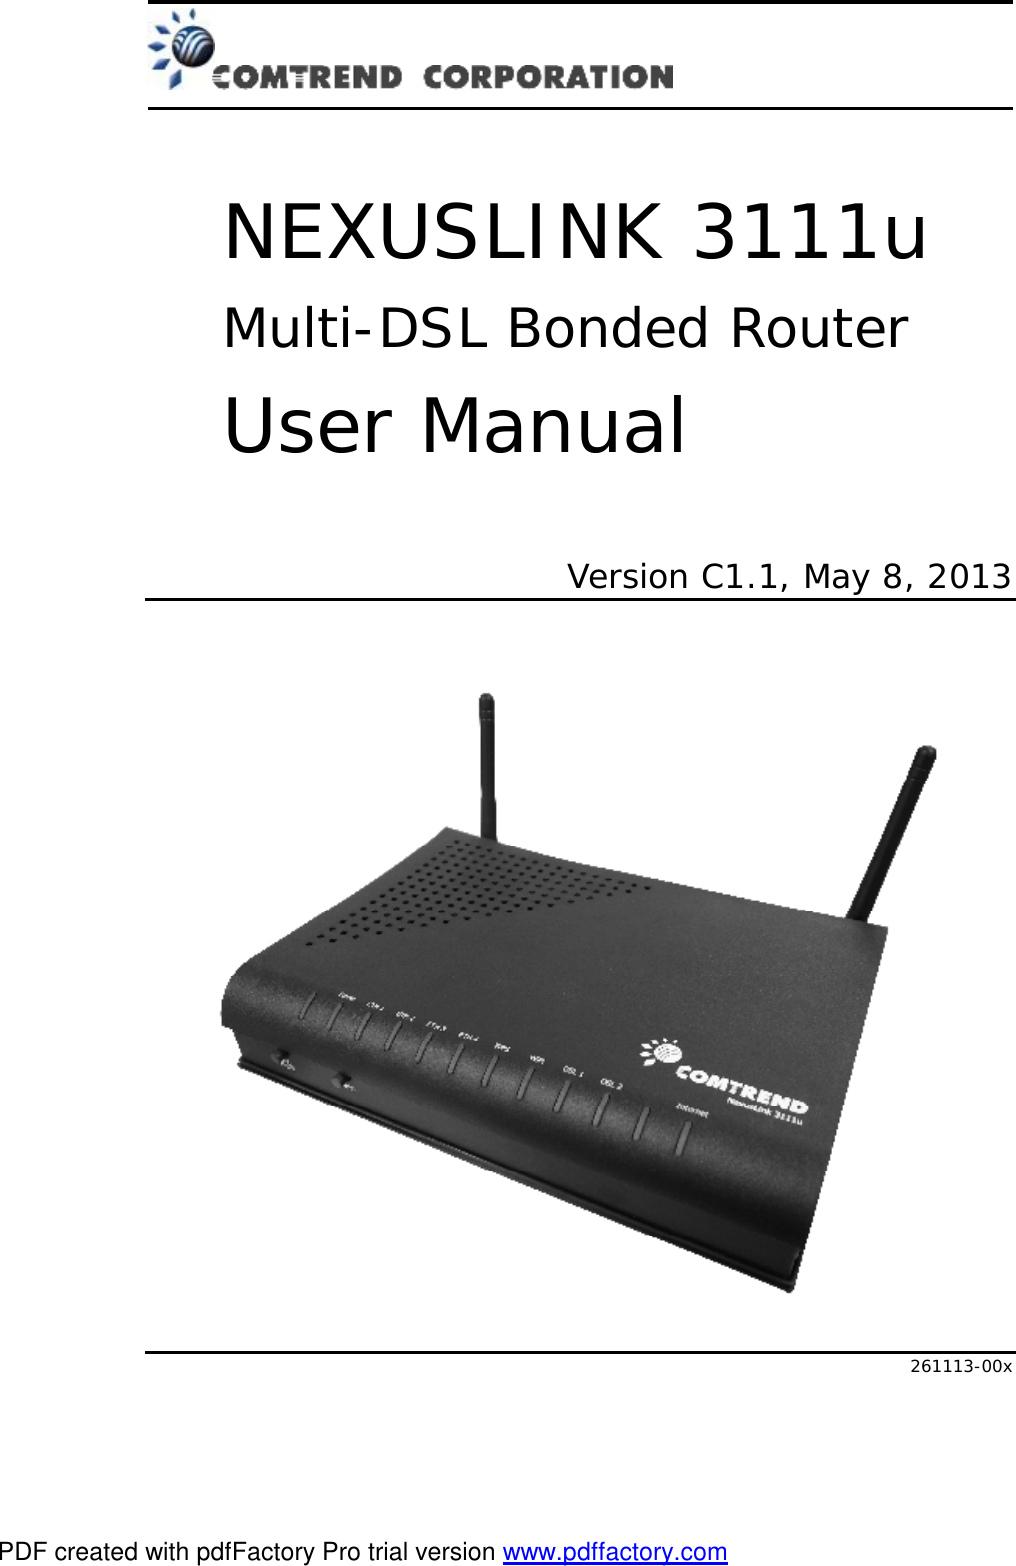       NEXUSLINK 3111u Multi-DSL Bonded Router User Manual  Version C1.1, May 8, 2013      261113-00x PDF created with pdfFactory Pro trial version www.pdffactory.com